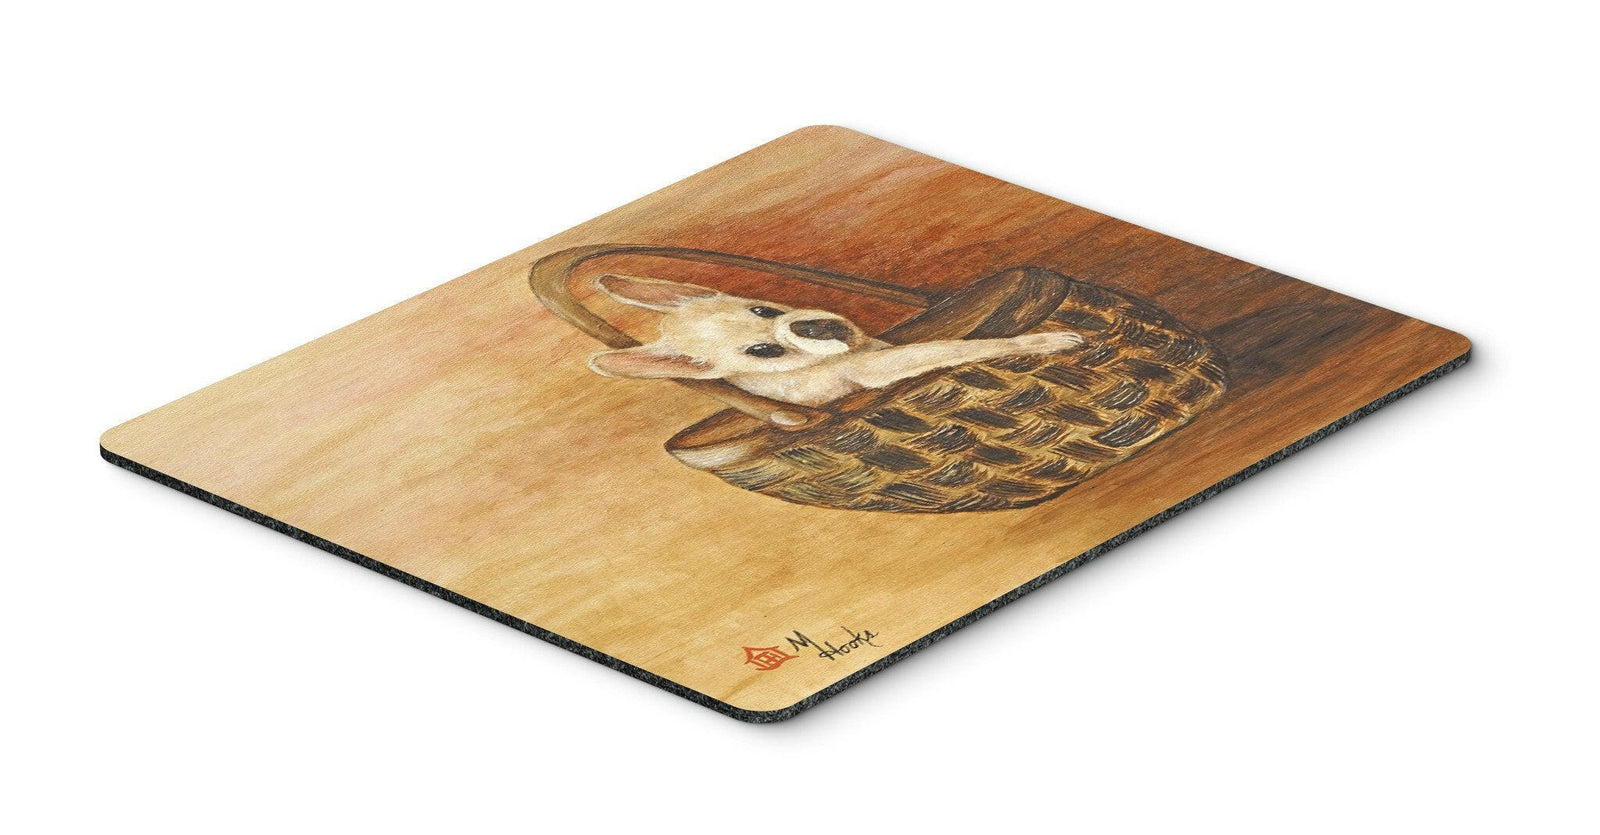 French Bulldog Take me TOO Mouse Pad, Hot Pad or Trivet MH1063MP by Caroline's Treasures